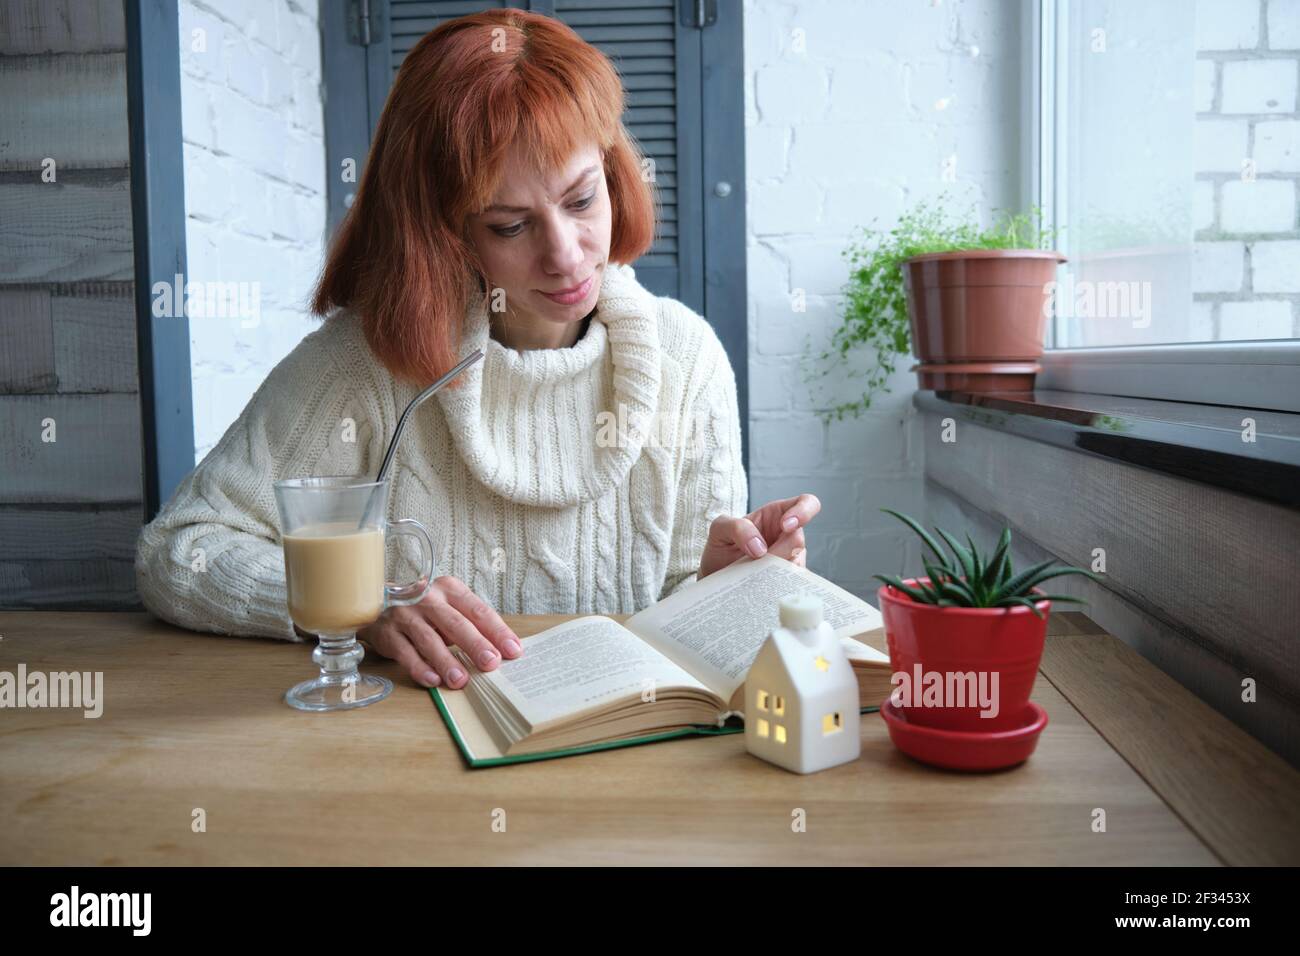 Young adult red haired girl relaxing at home with mug of hot beverage and book in domestic kitchen, relaxing during quarantine Stock Photo